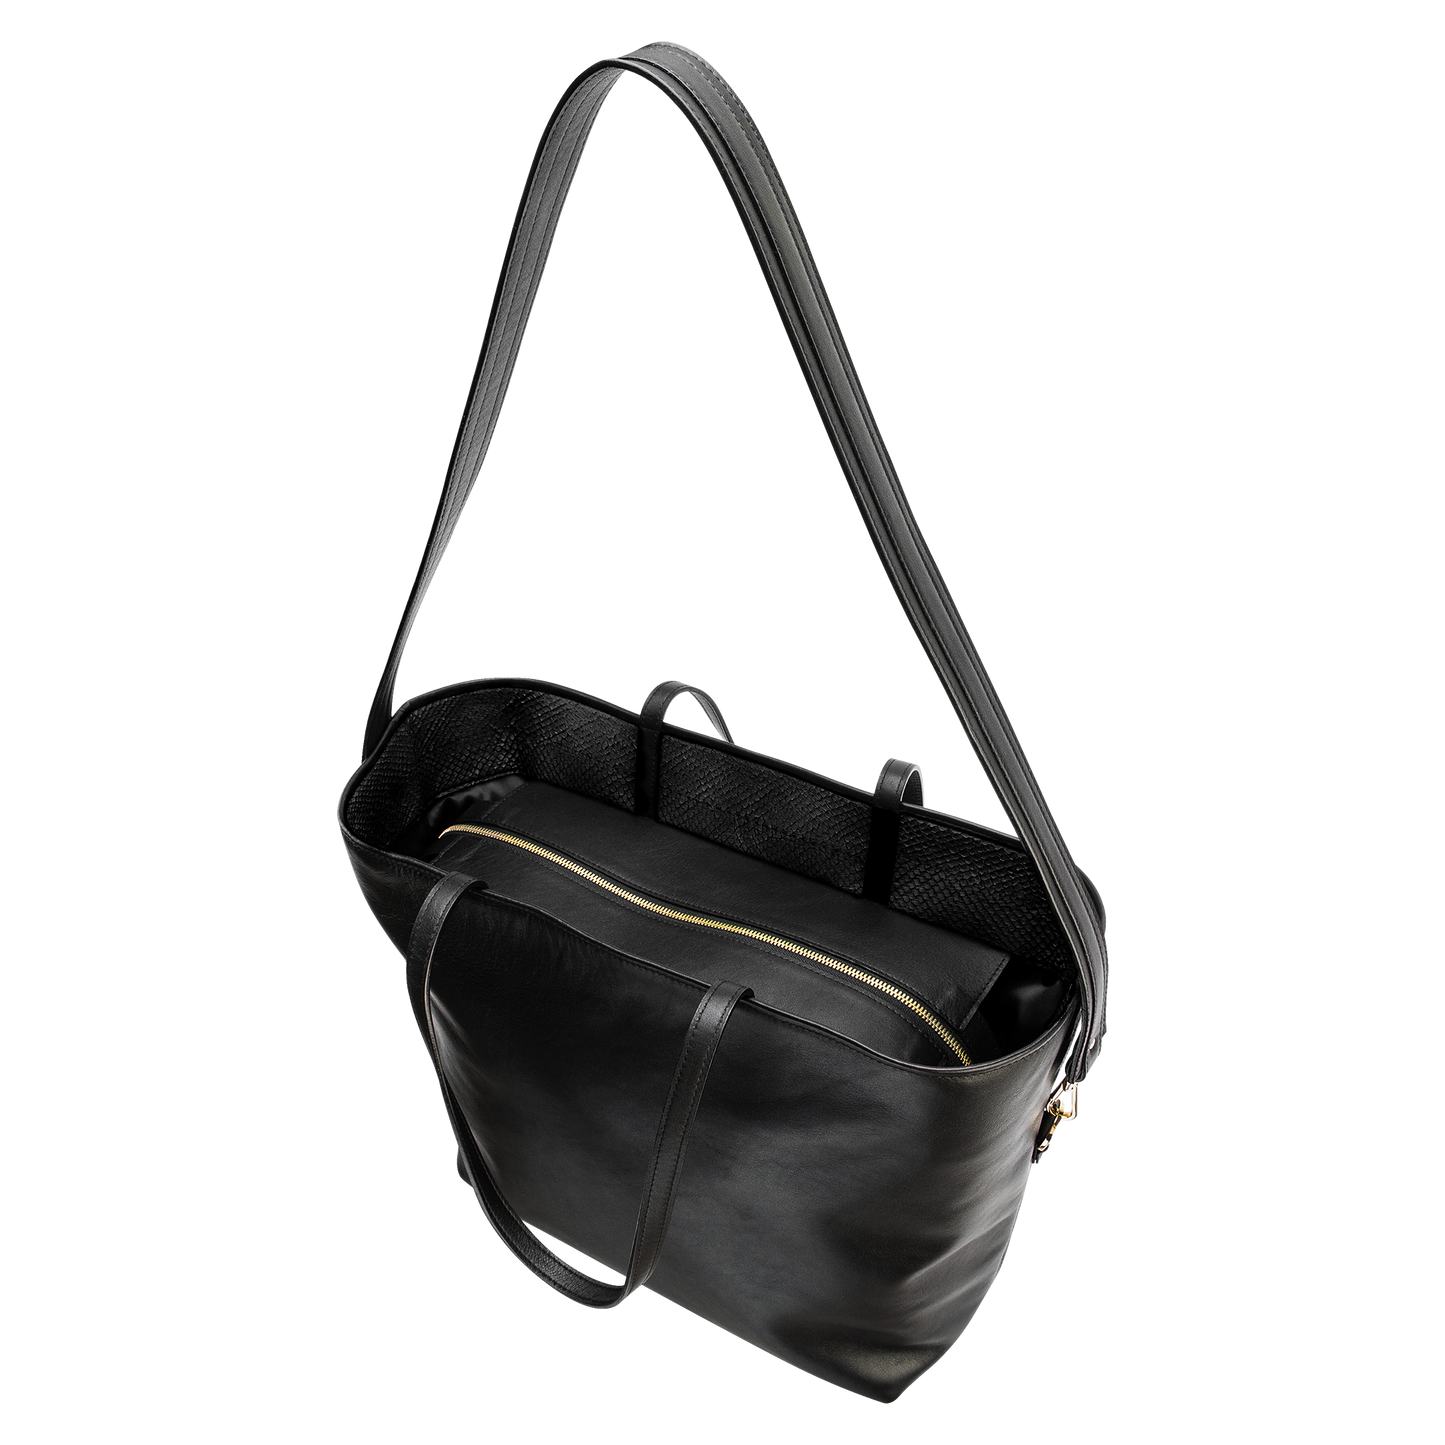 W Bag Black with black fish leather